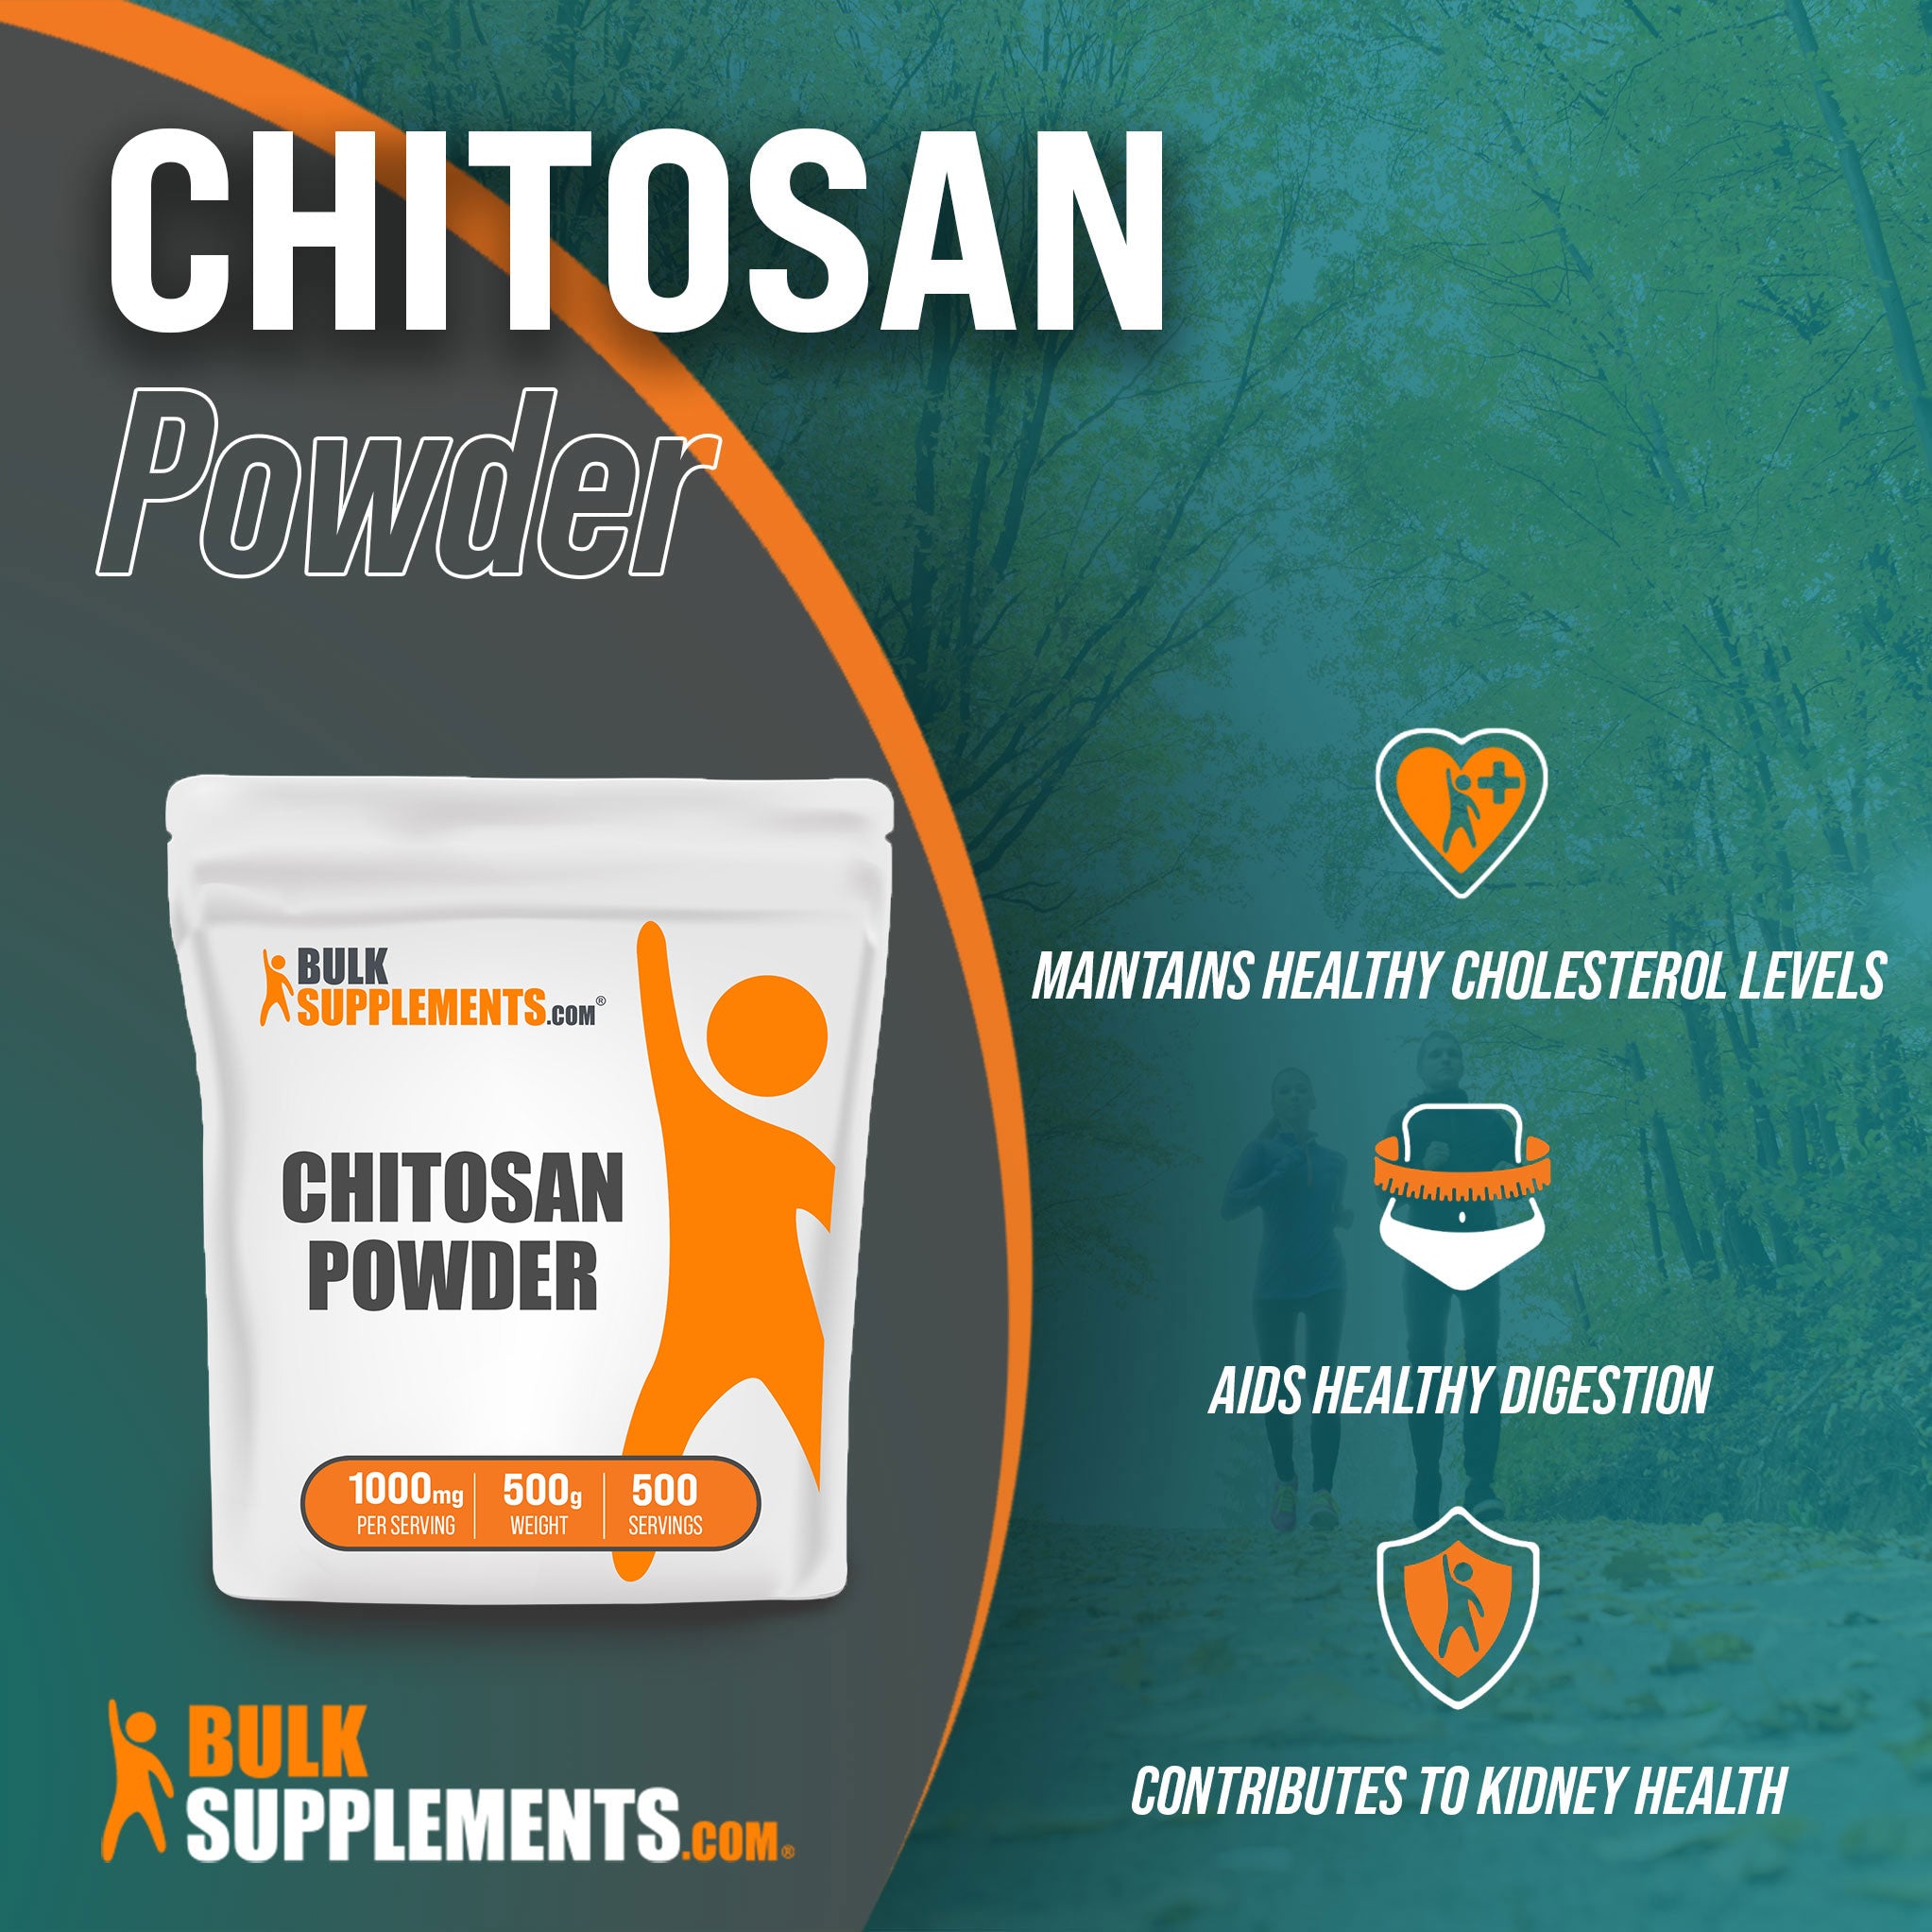 500g Chitosan Powder fiber supplement; maintains healthy cholesterol levels, aids healthy digestion, contributes to kidney health